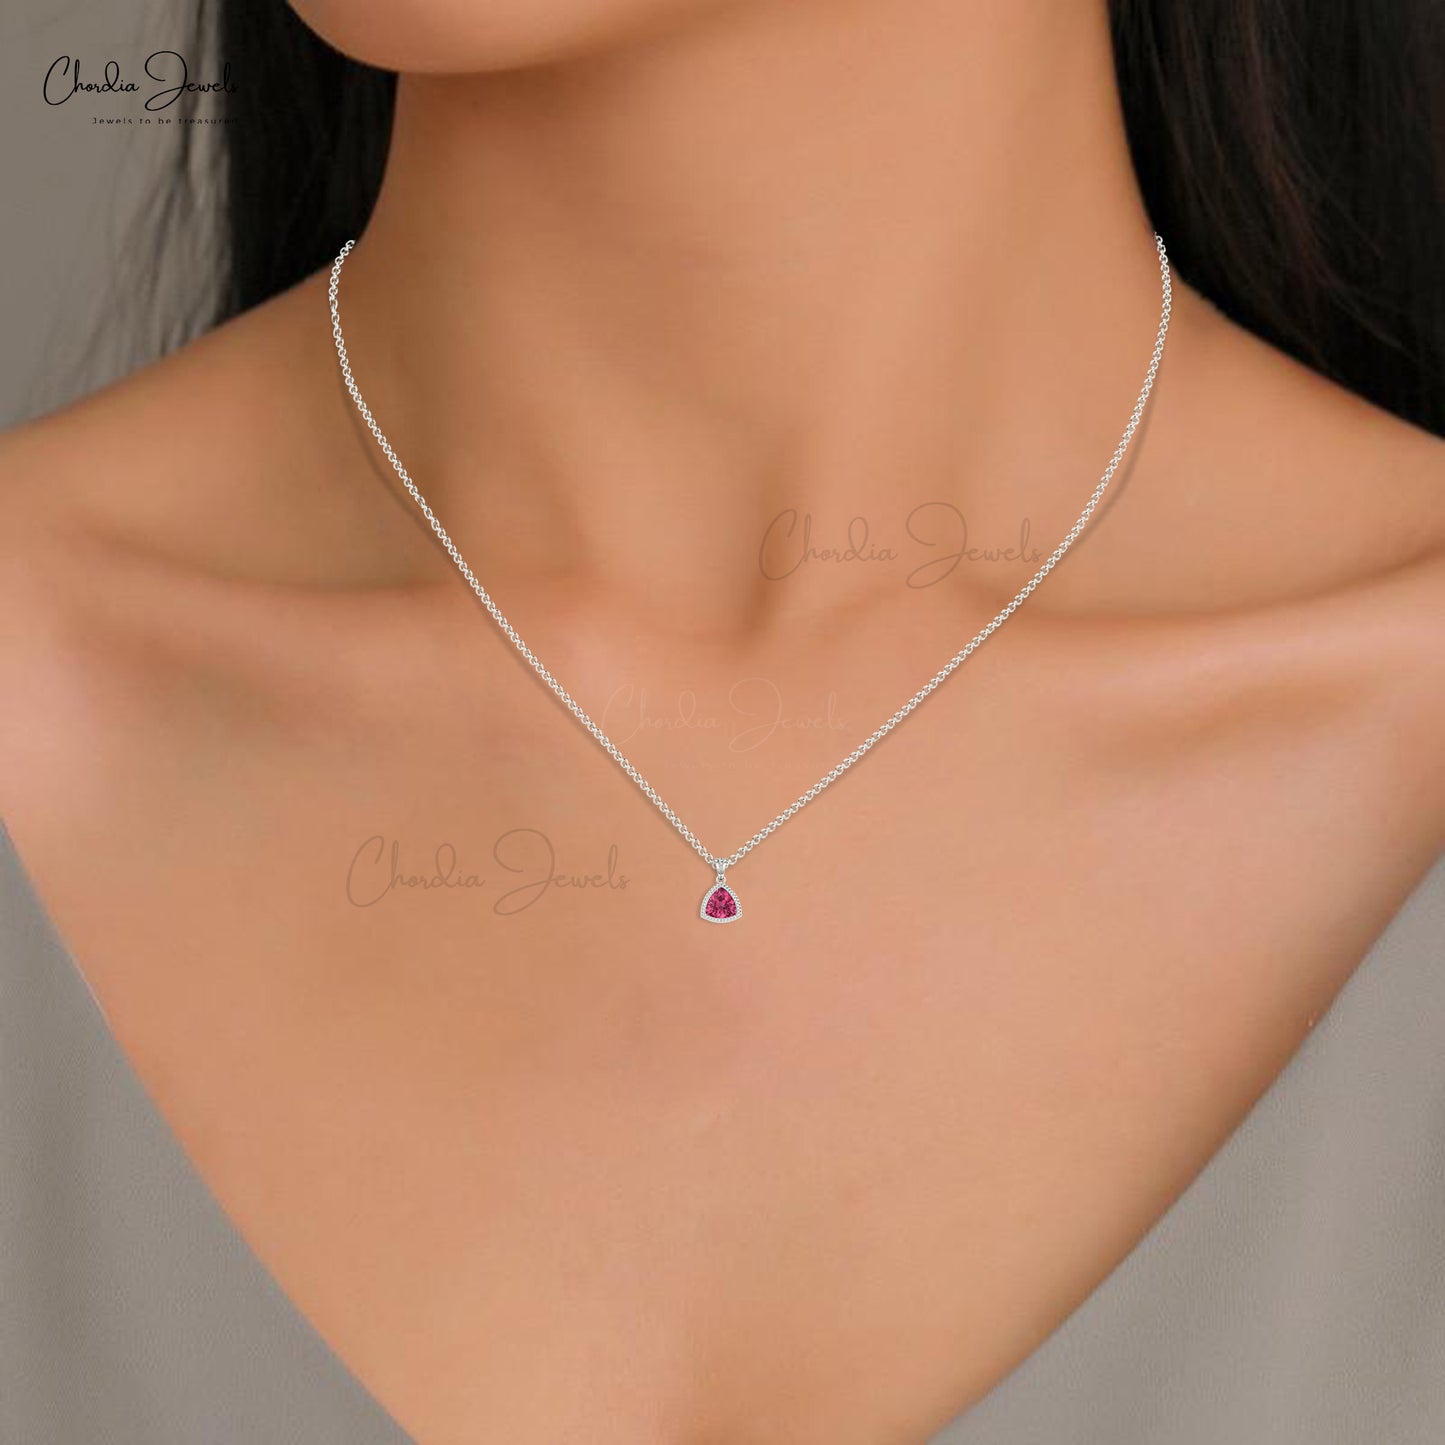 Natural Pink Tourmaline Dainty Pendant 6mm Trillion Cut Gemstone Hallmarked Pendant 14k Real Gold Fine Jewelry For Surprise Gift